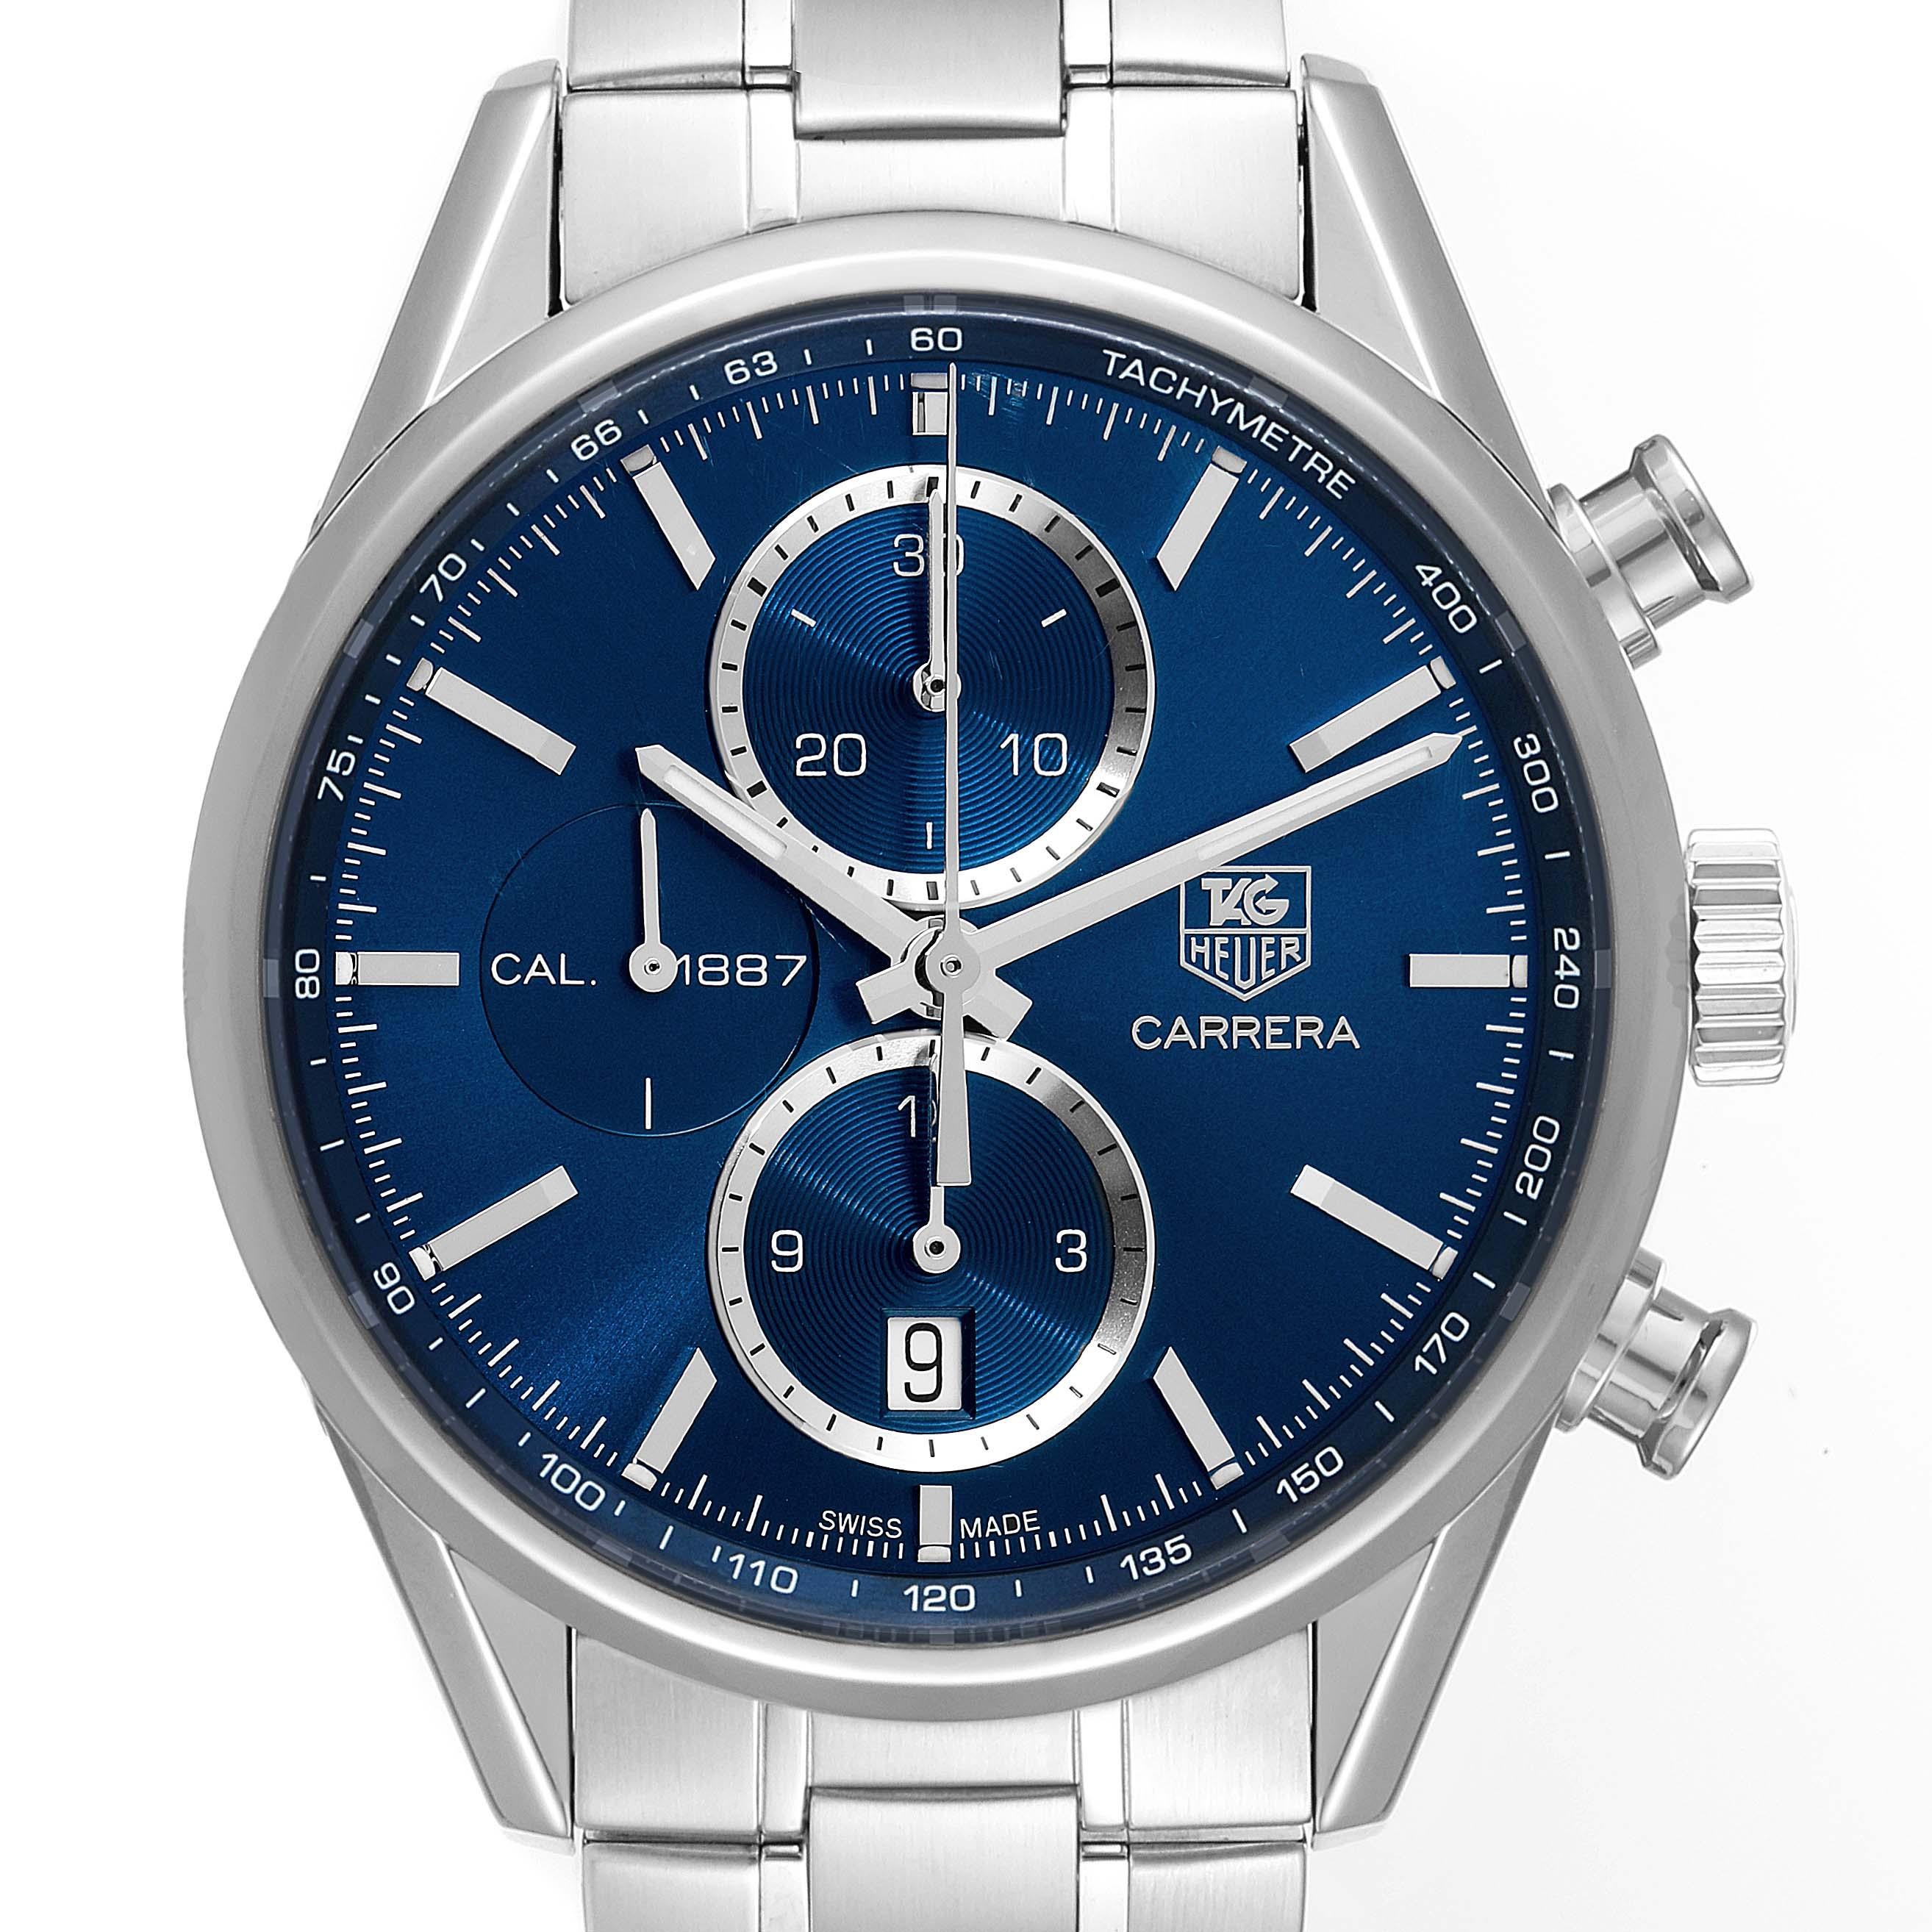 Tag Heuer Carrera 1887 Chronograph Blue Dial Steel Mens Watch CAR2115. Automatic self-winding chronograph movement. Stainless steel round case 41.0 mm. Exhibition sapphire crystal caseback. Stainless steel bezel. Scratch resistant sapphire crystal.